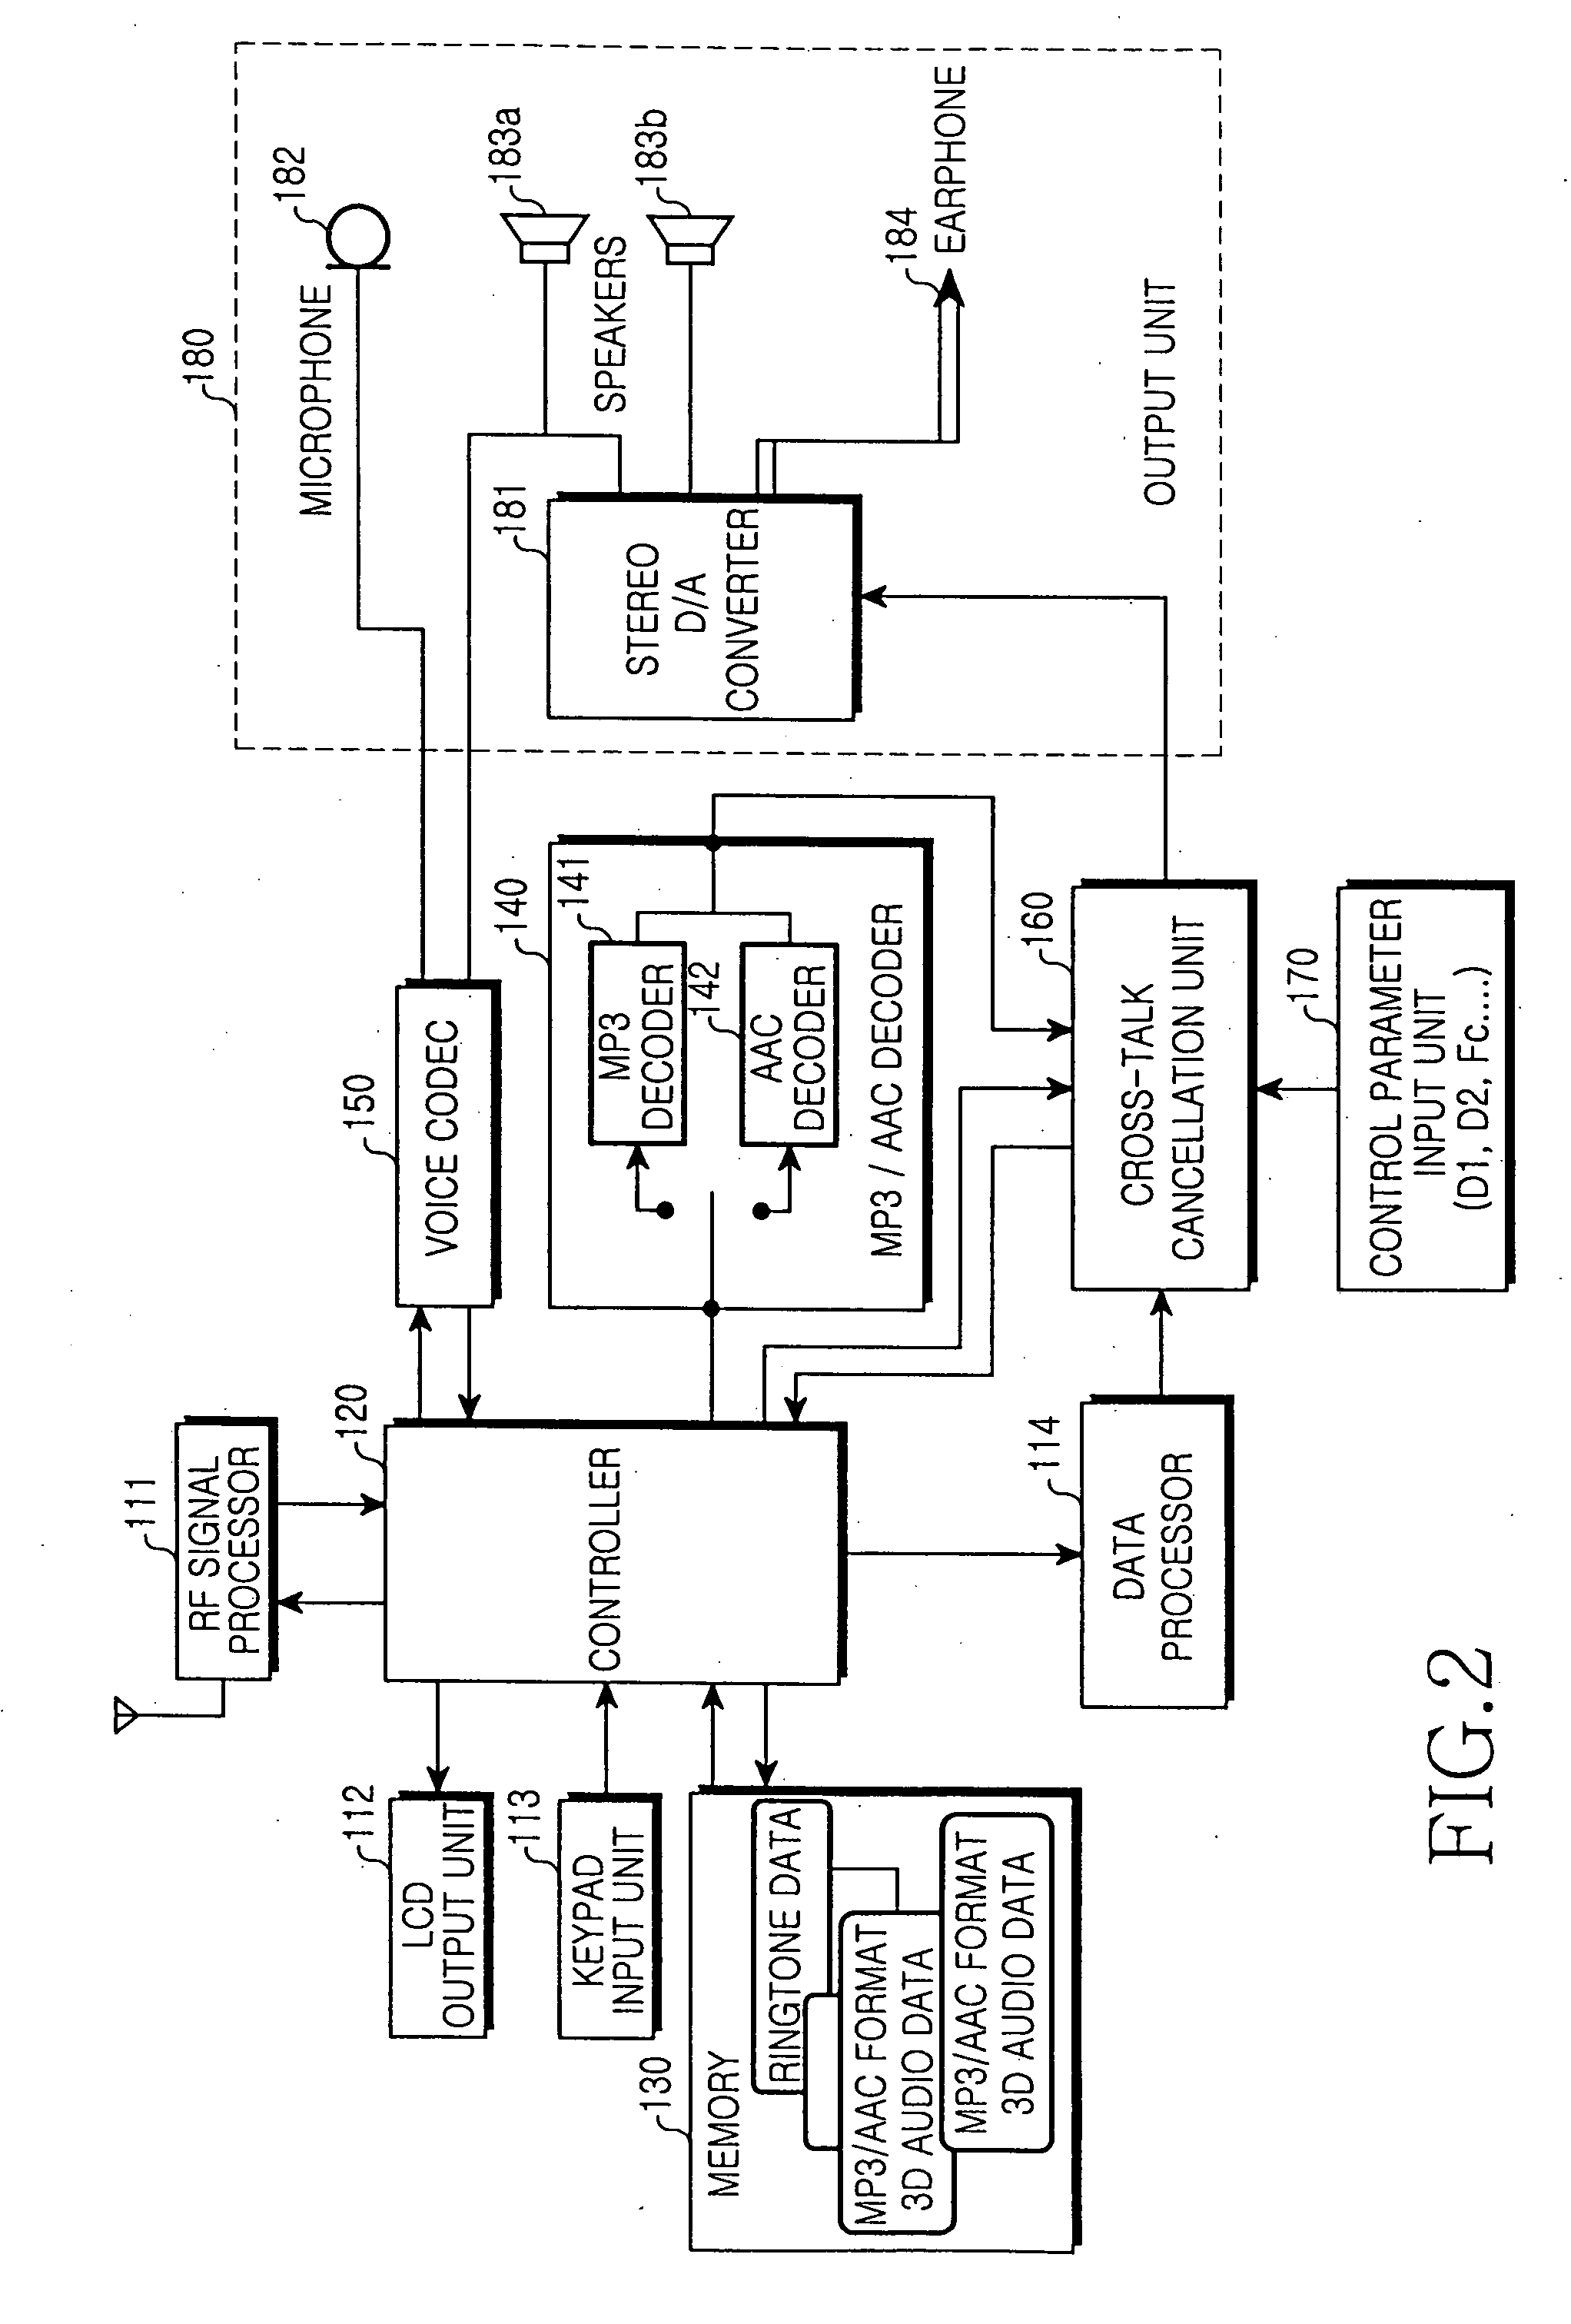 Apparatus and method for cross-talk cancellation in a mobile device